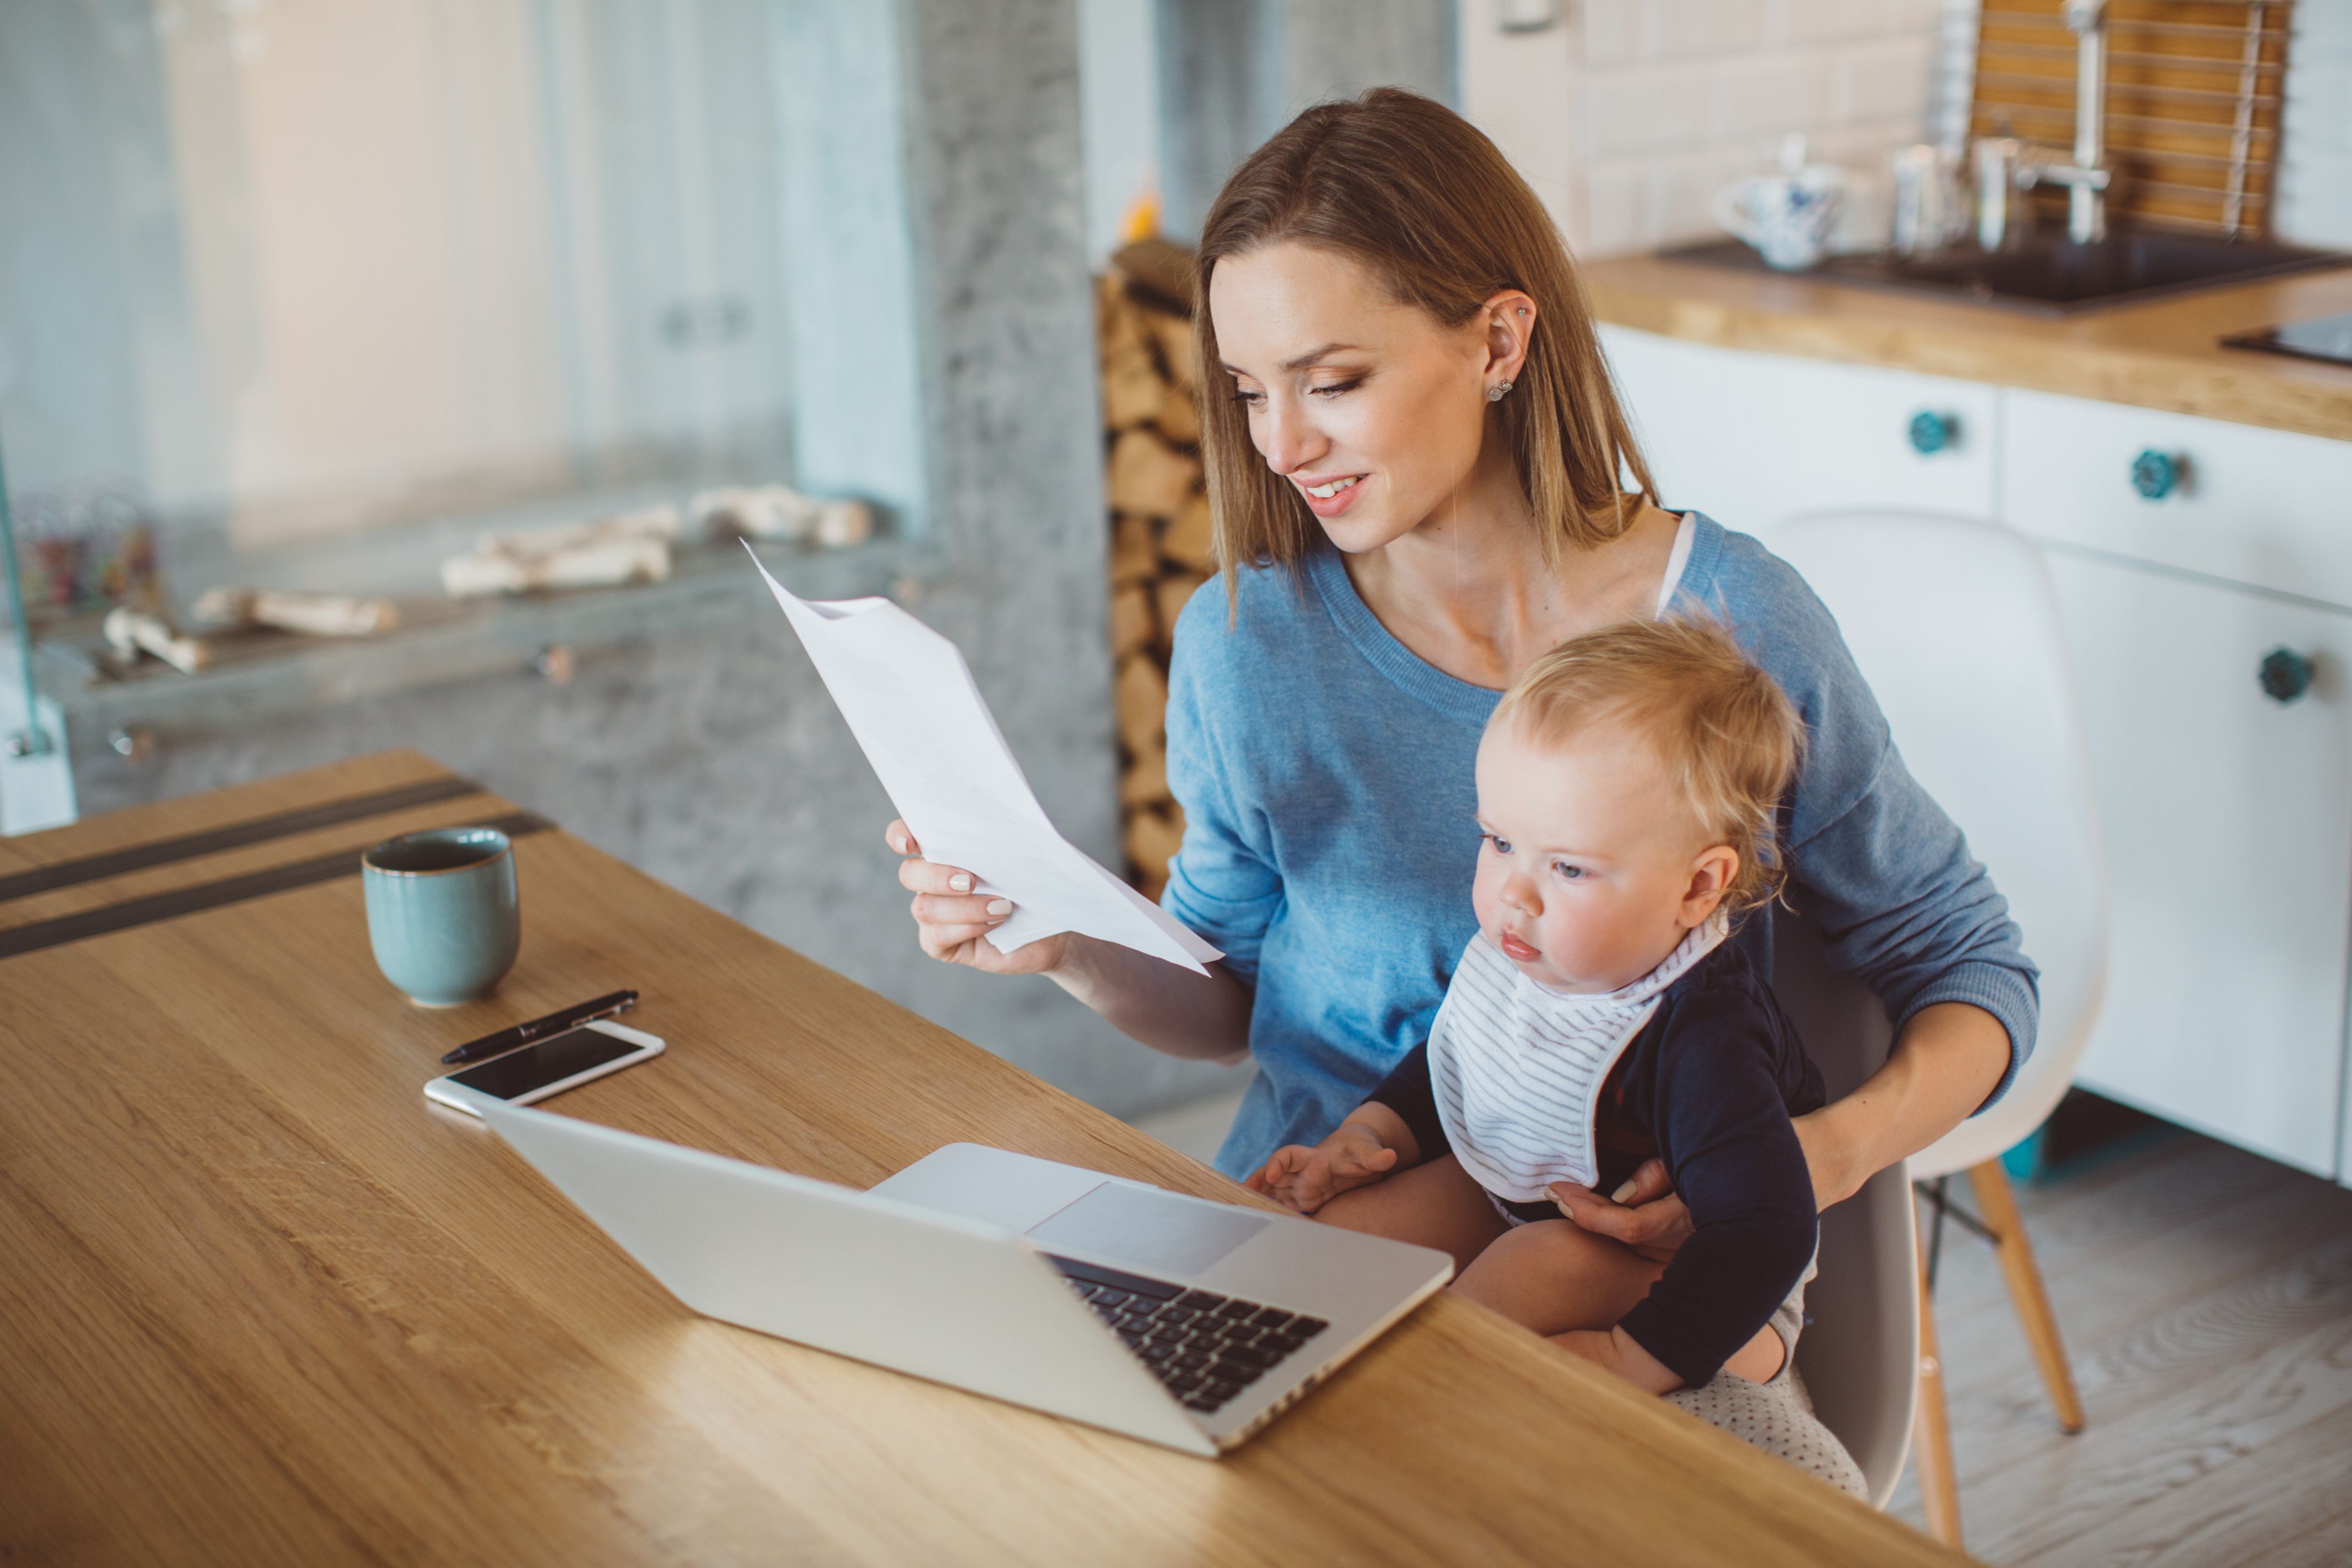 How can I work from home as a mom